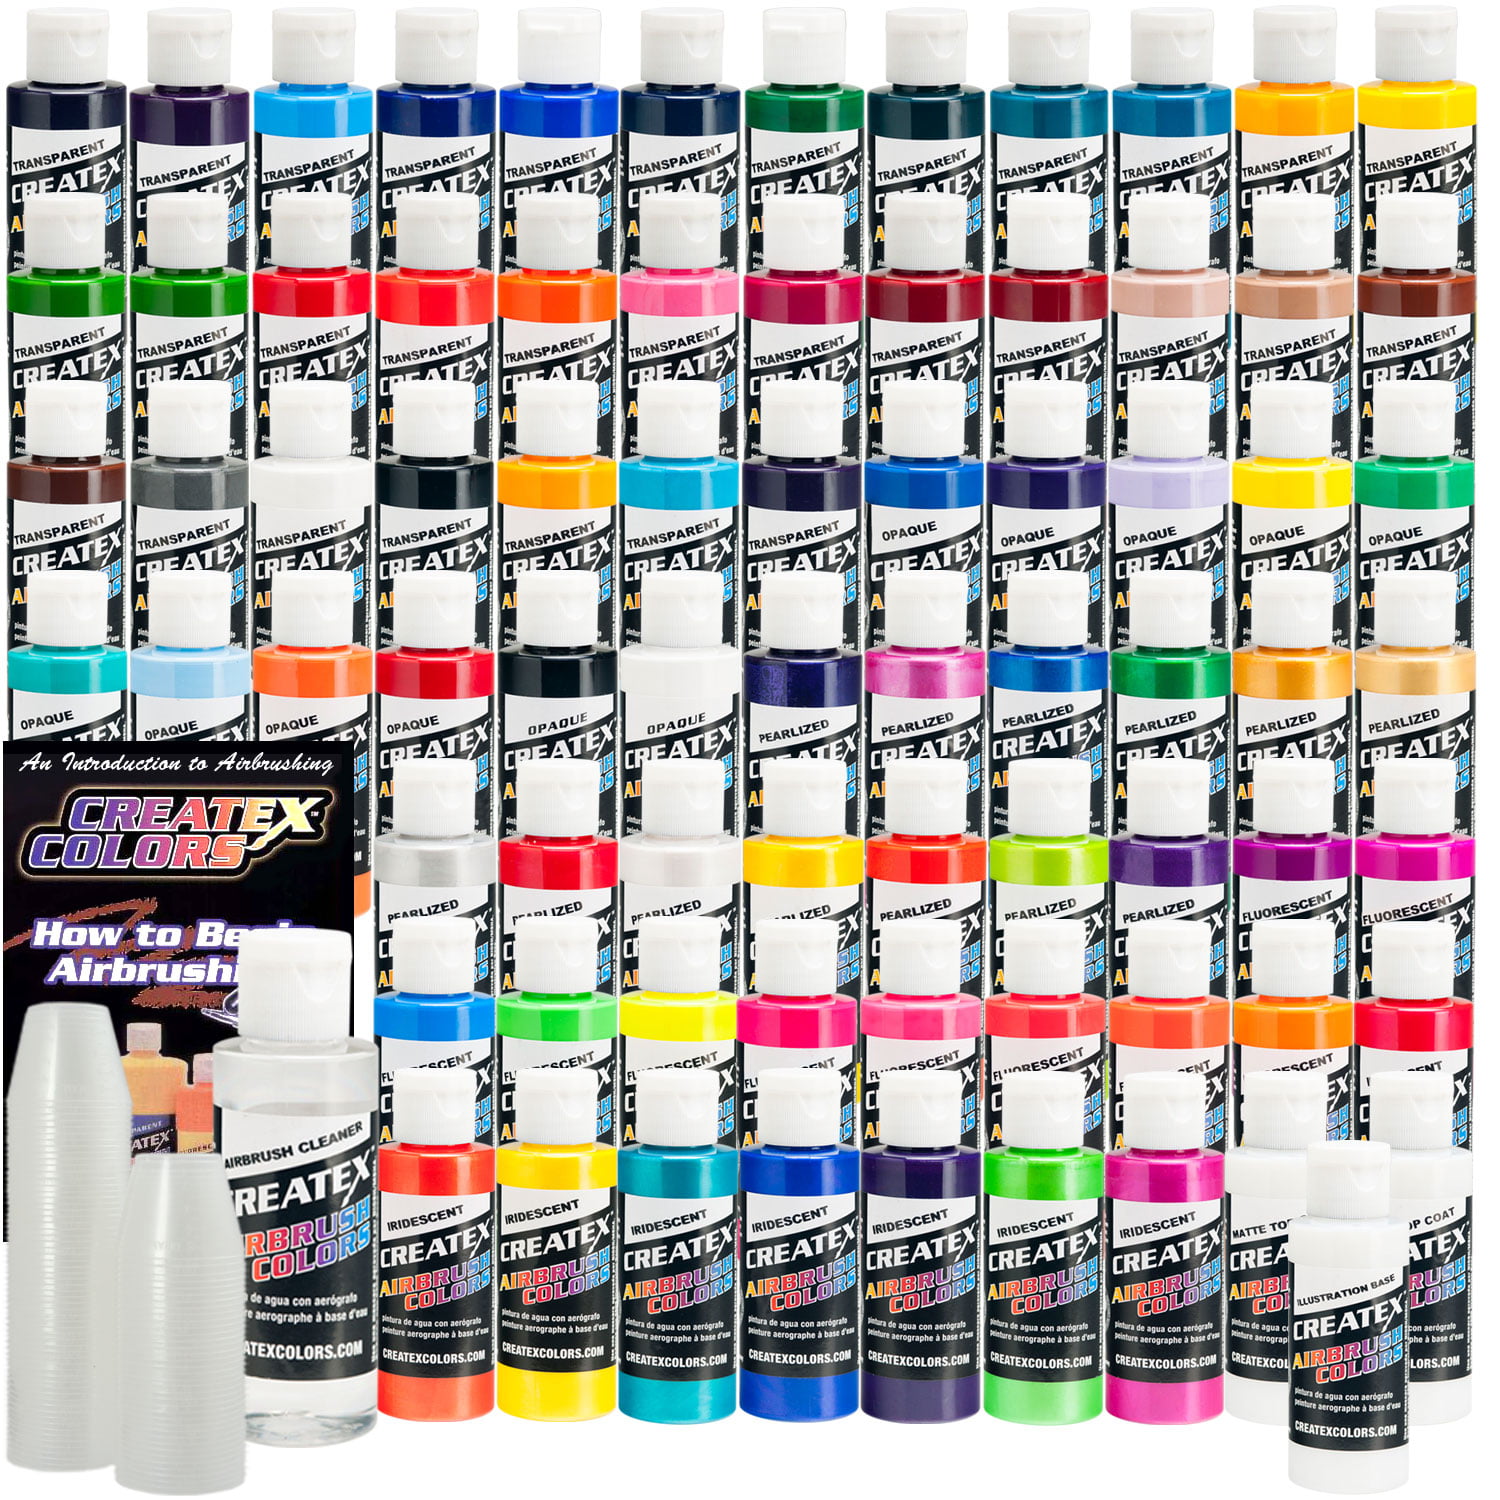 Createx™ Airbrush Color Primary 6 Color Set